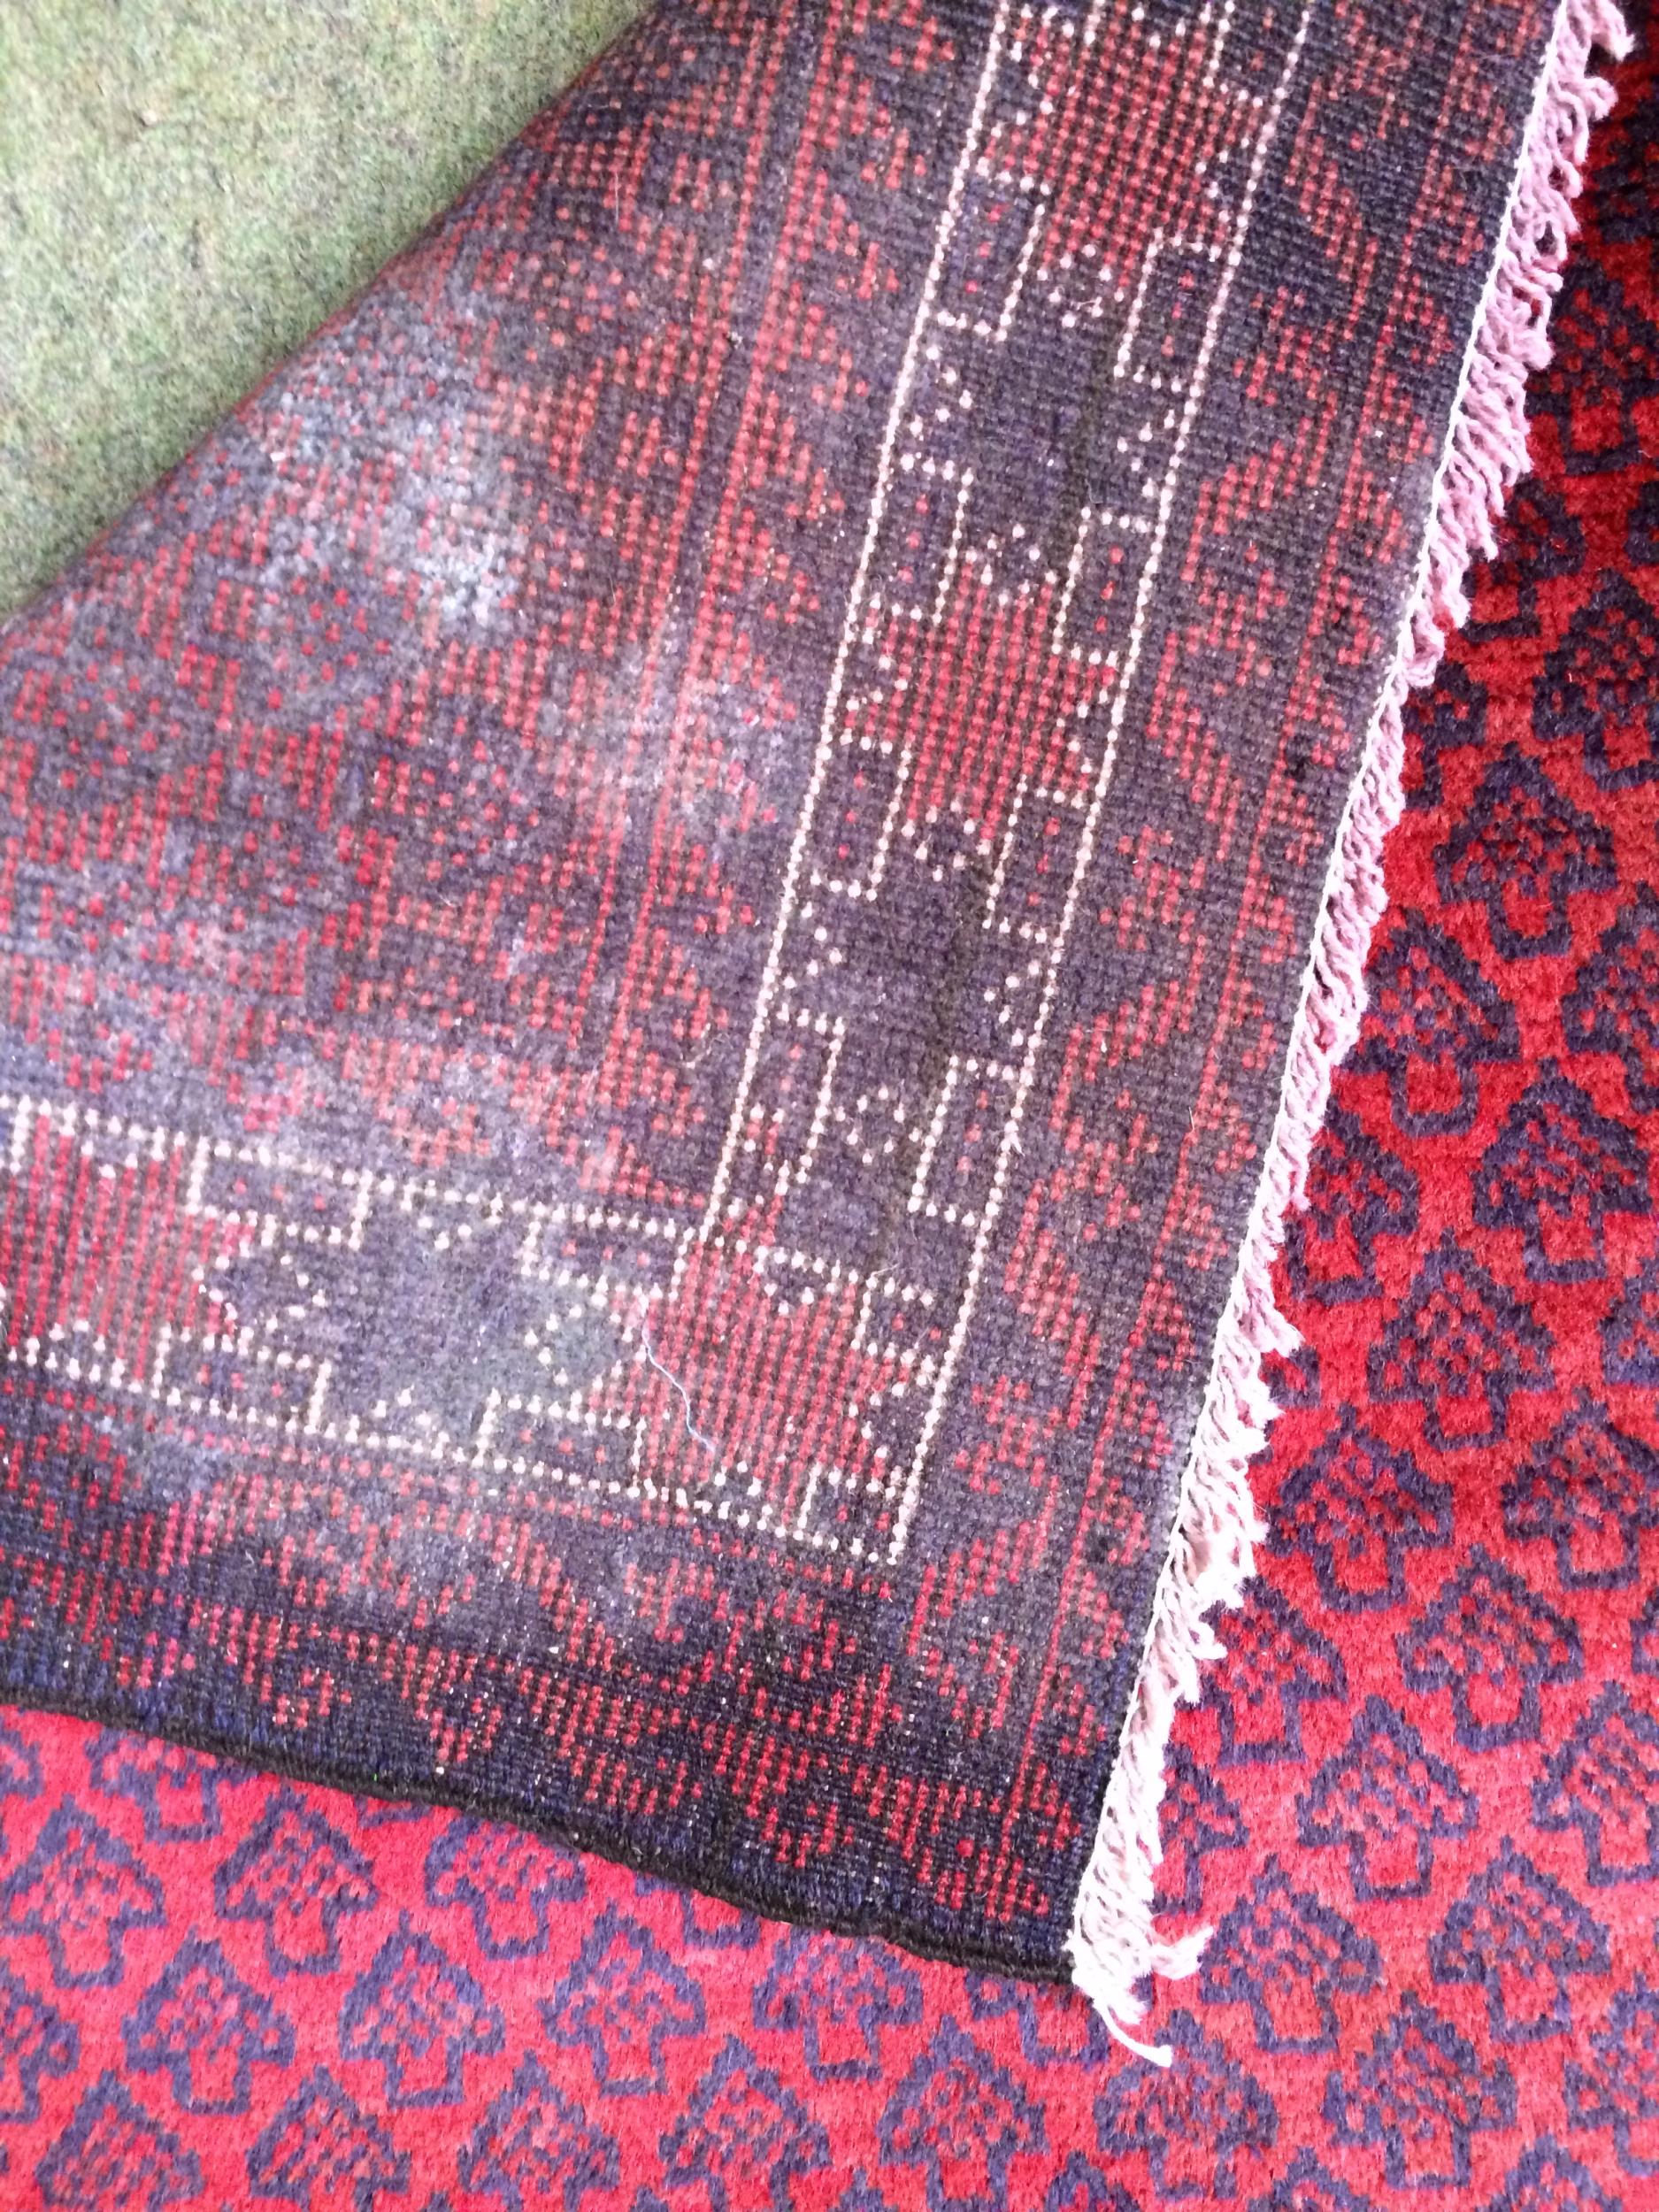 4 rugs, 3 red ground rugs with all over geometric stylized designs, and a blue and red ground Tree - Image 8 of 9